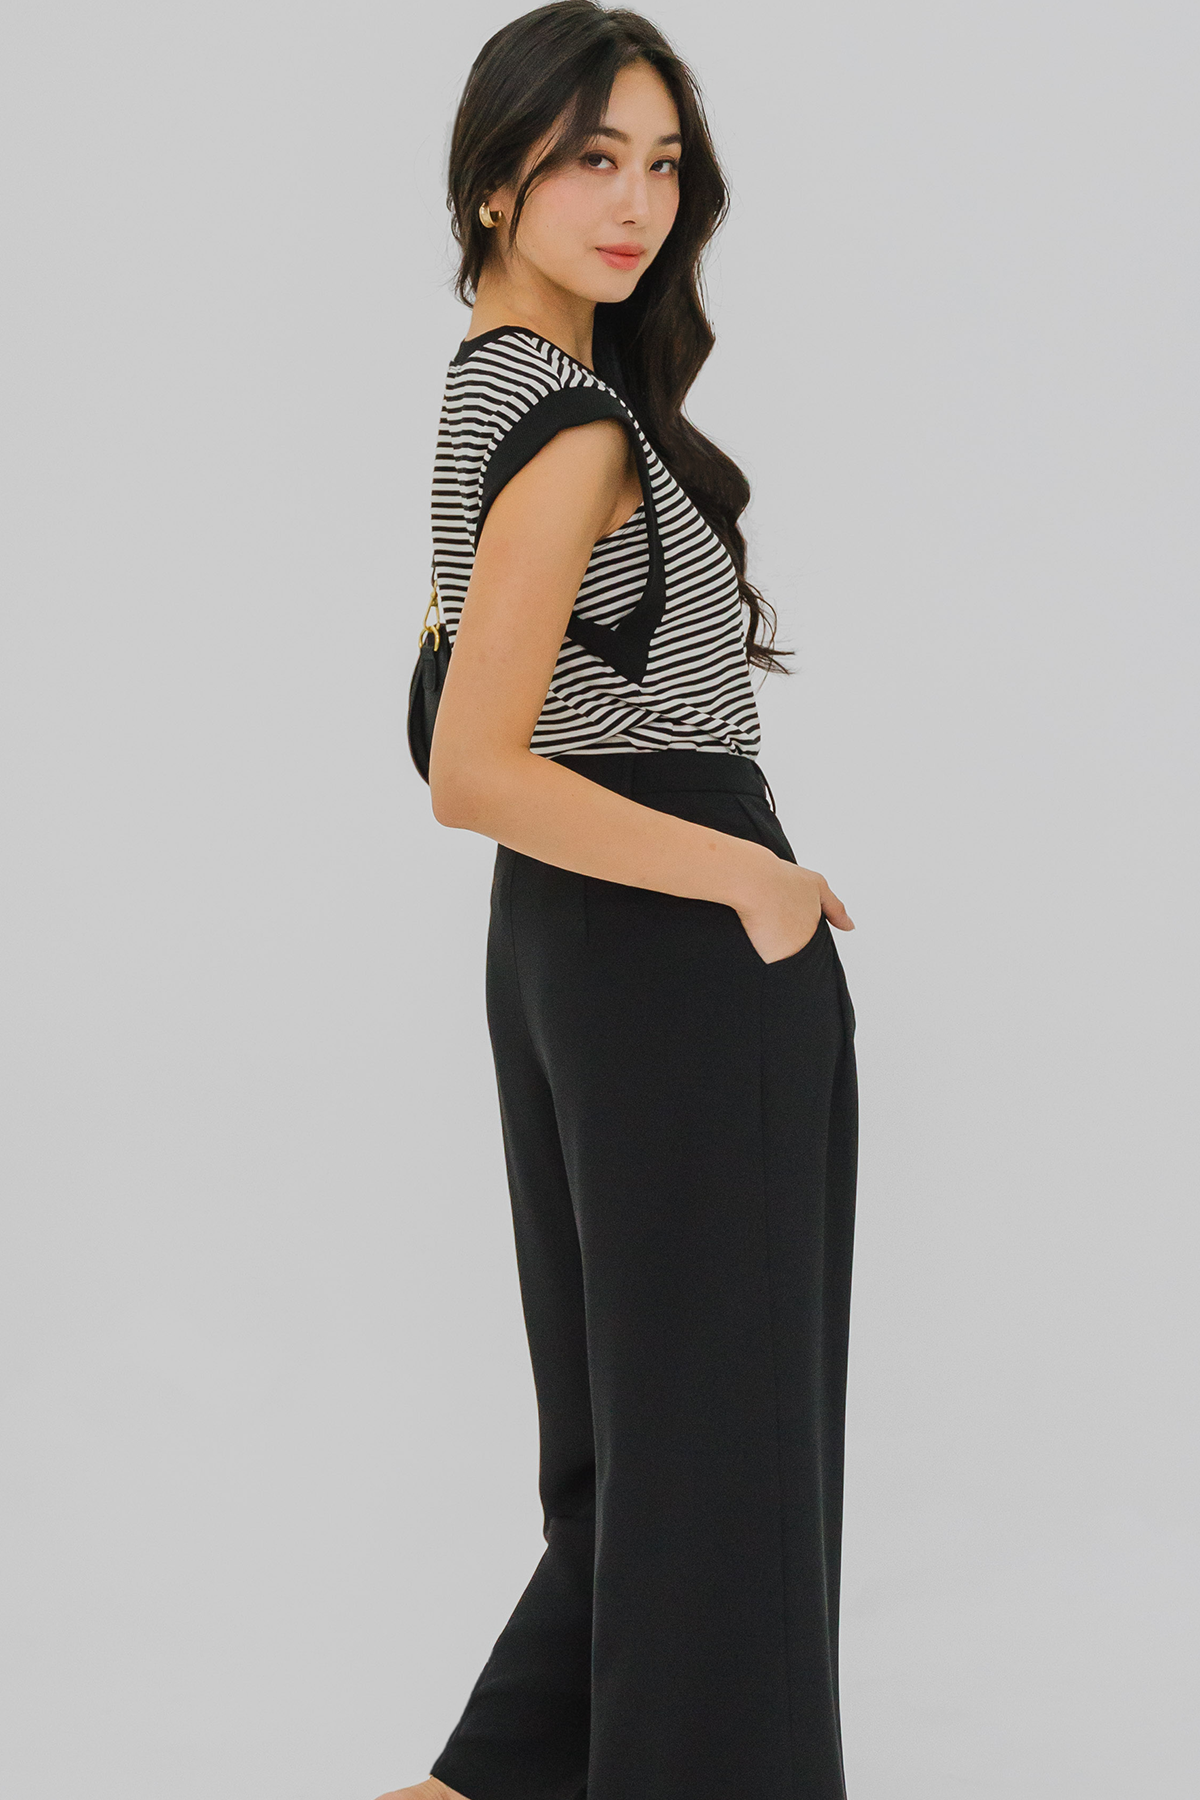 Dale Relaxed Tailored Pants (Black)